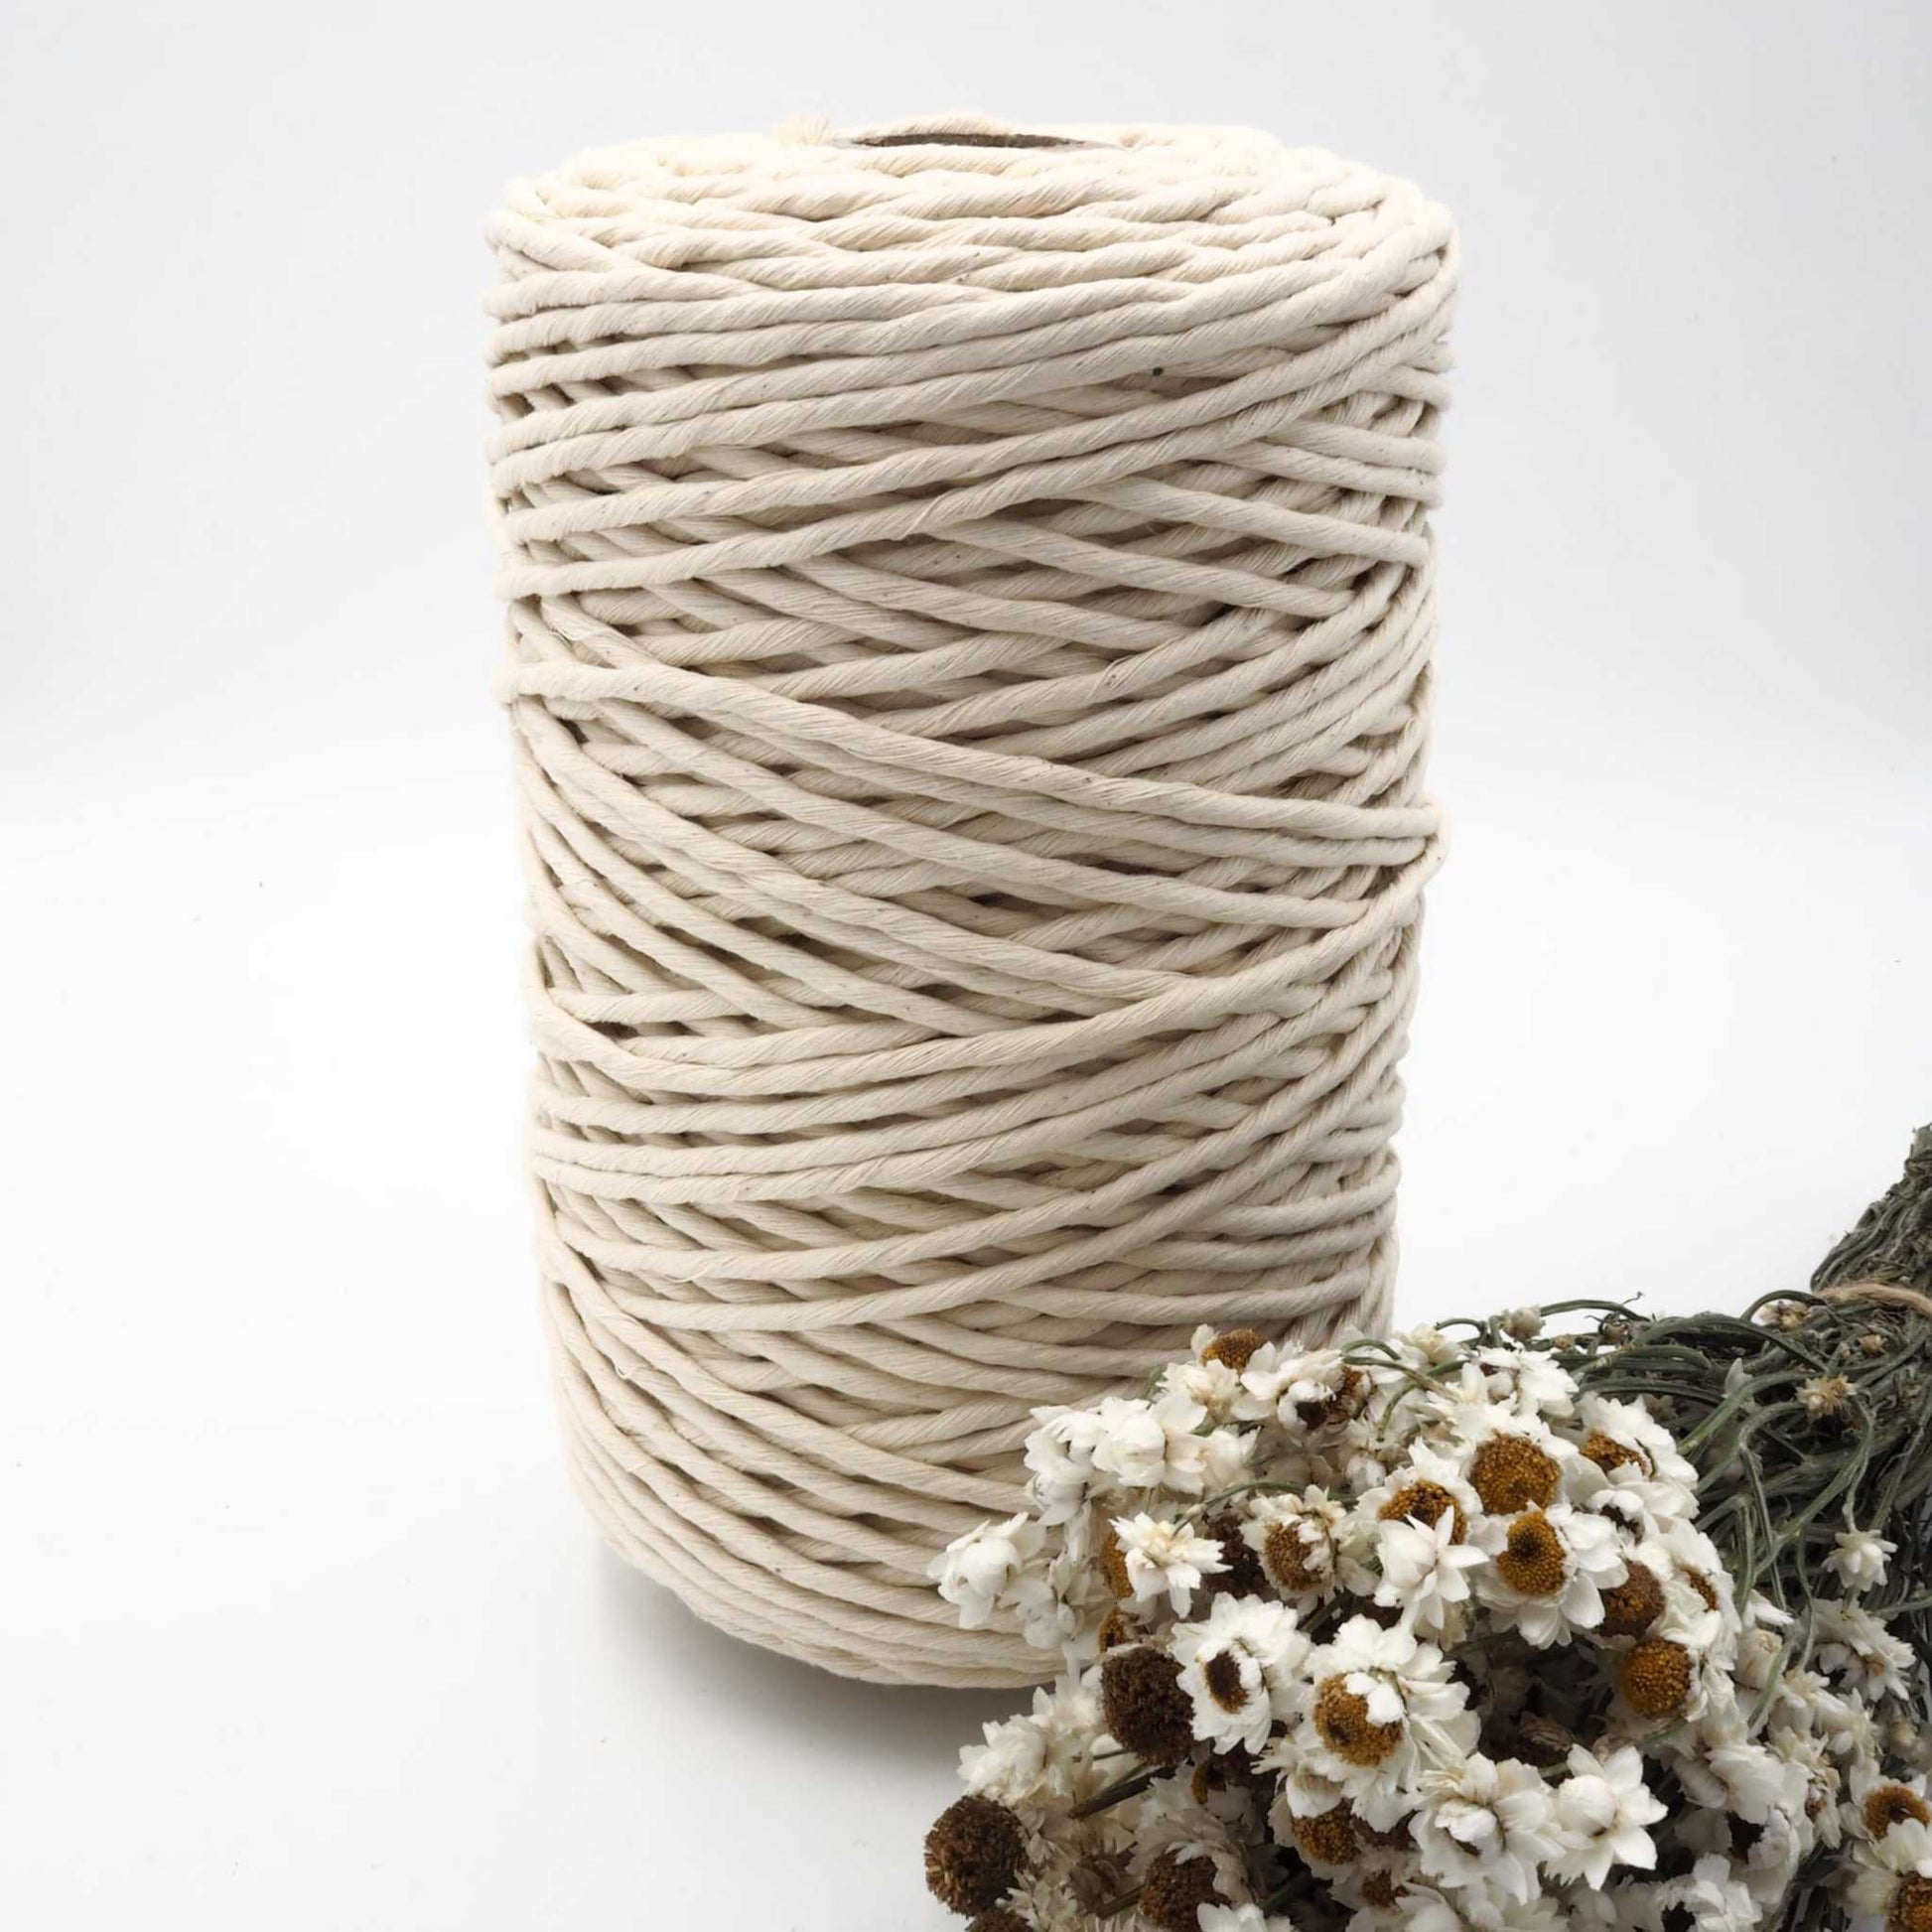 5mm recycled cotton string